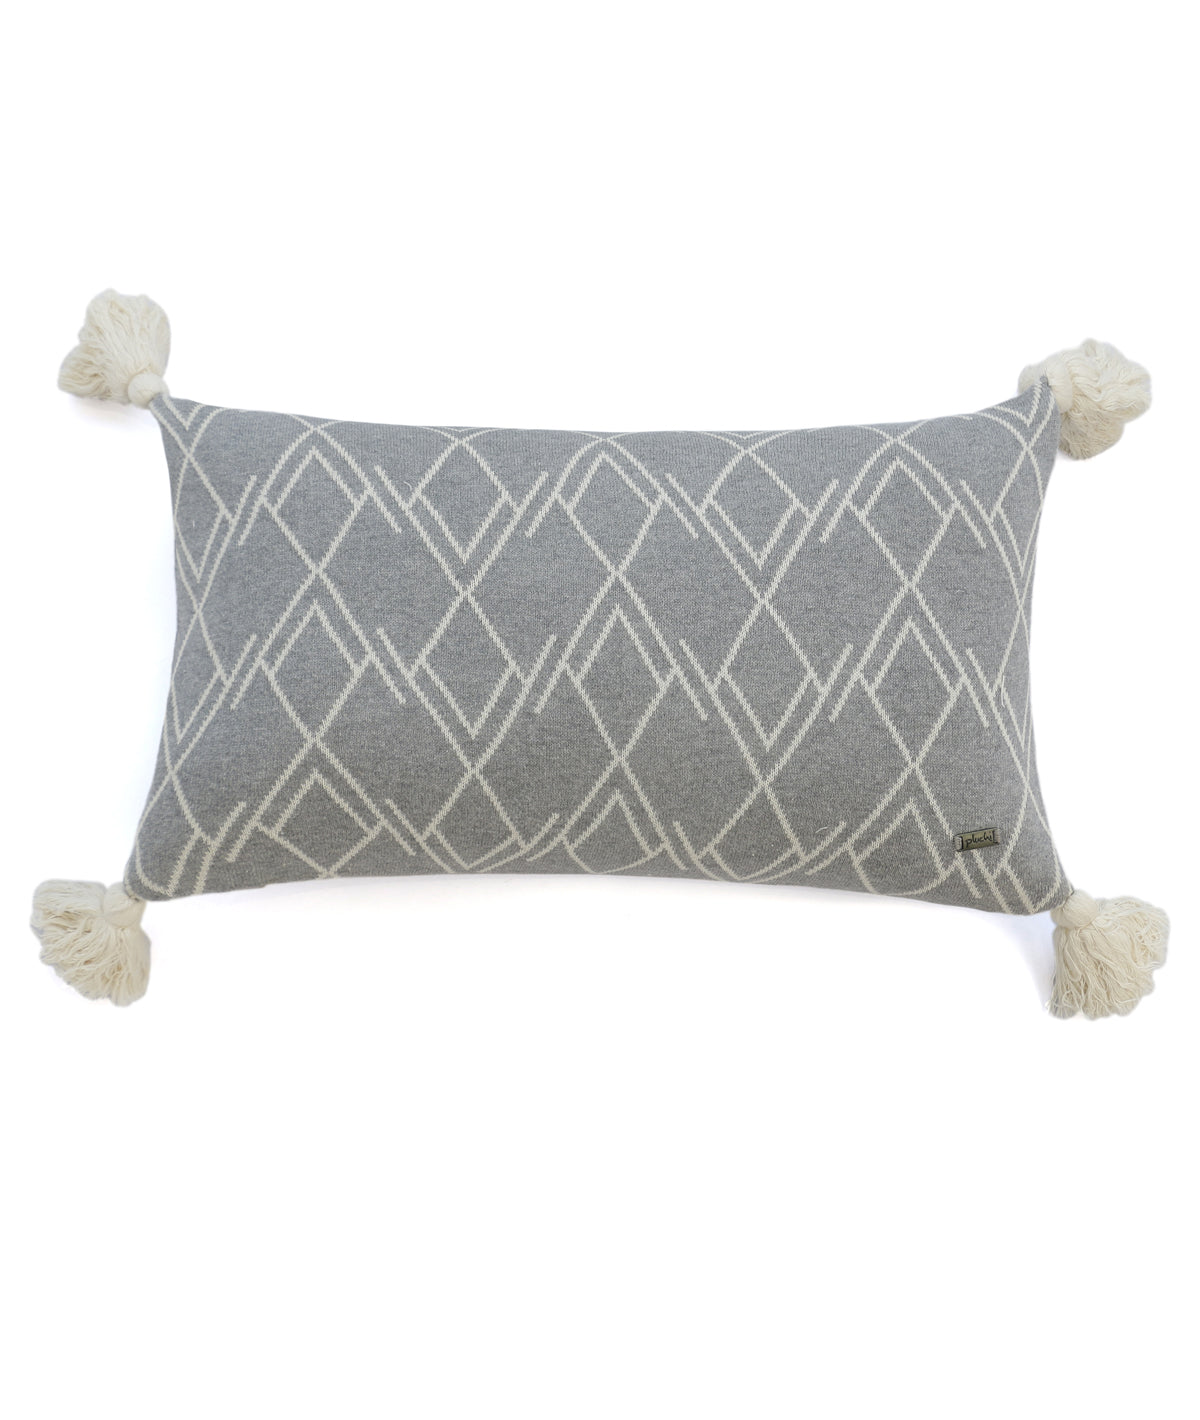 Gianna Cotton Knitted Decorative Light Grey & Natural Color 12 x 20 Inches Pillow Covers